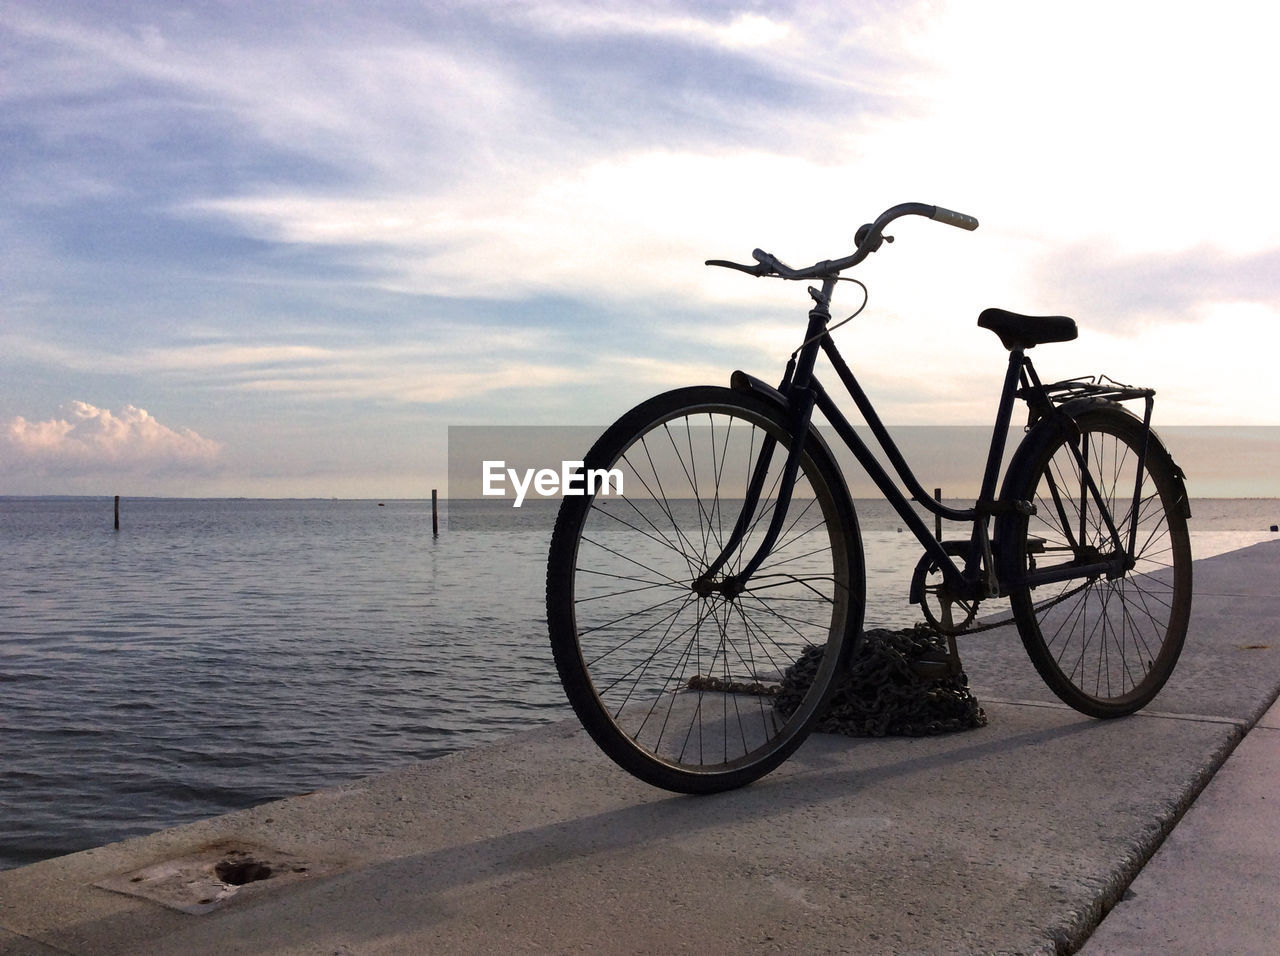 Bicycle on jetty against sea